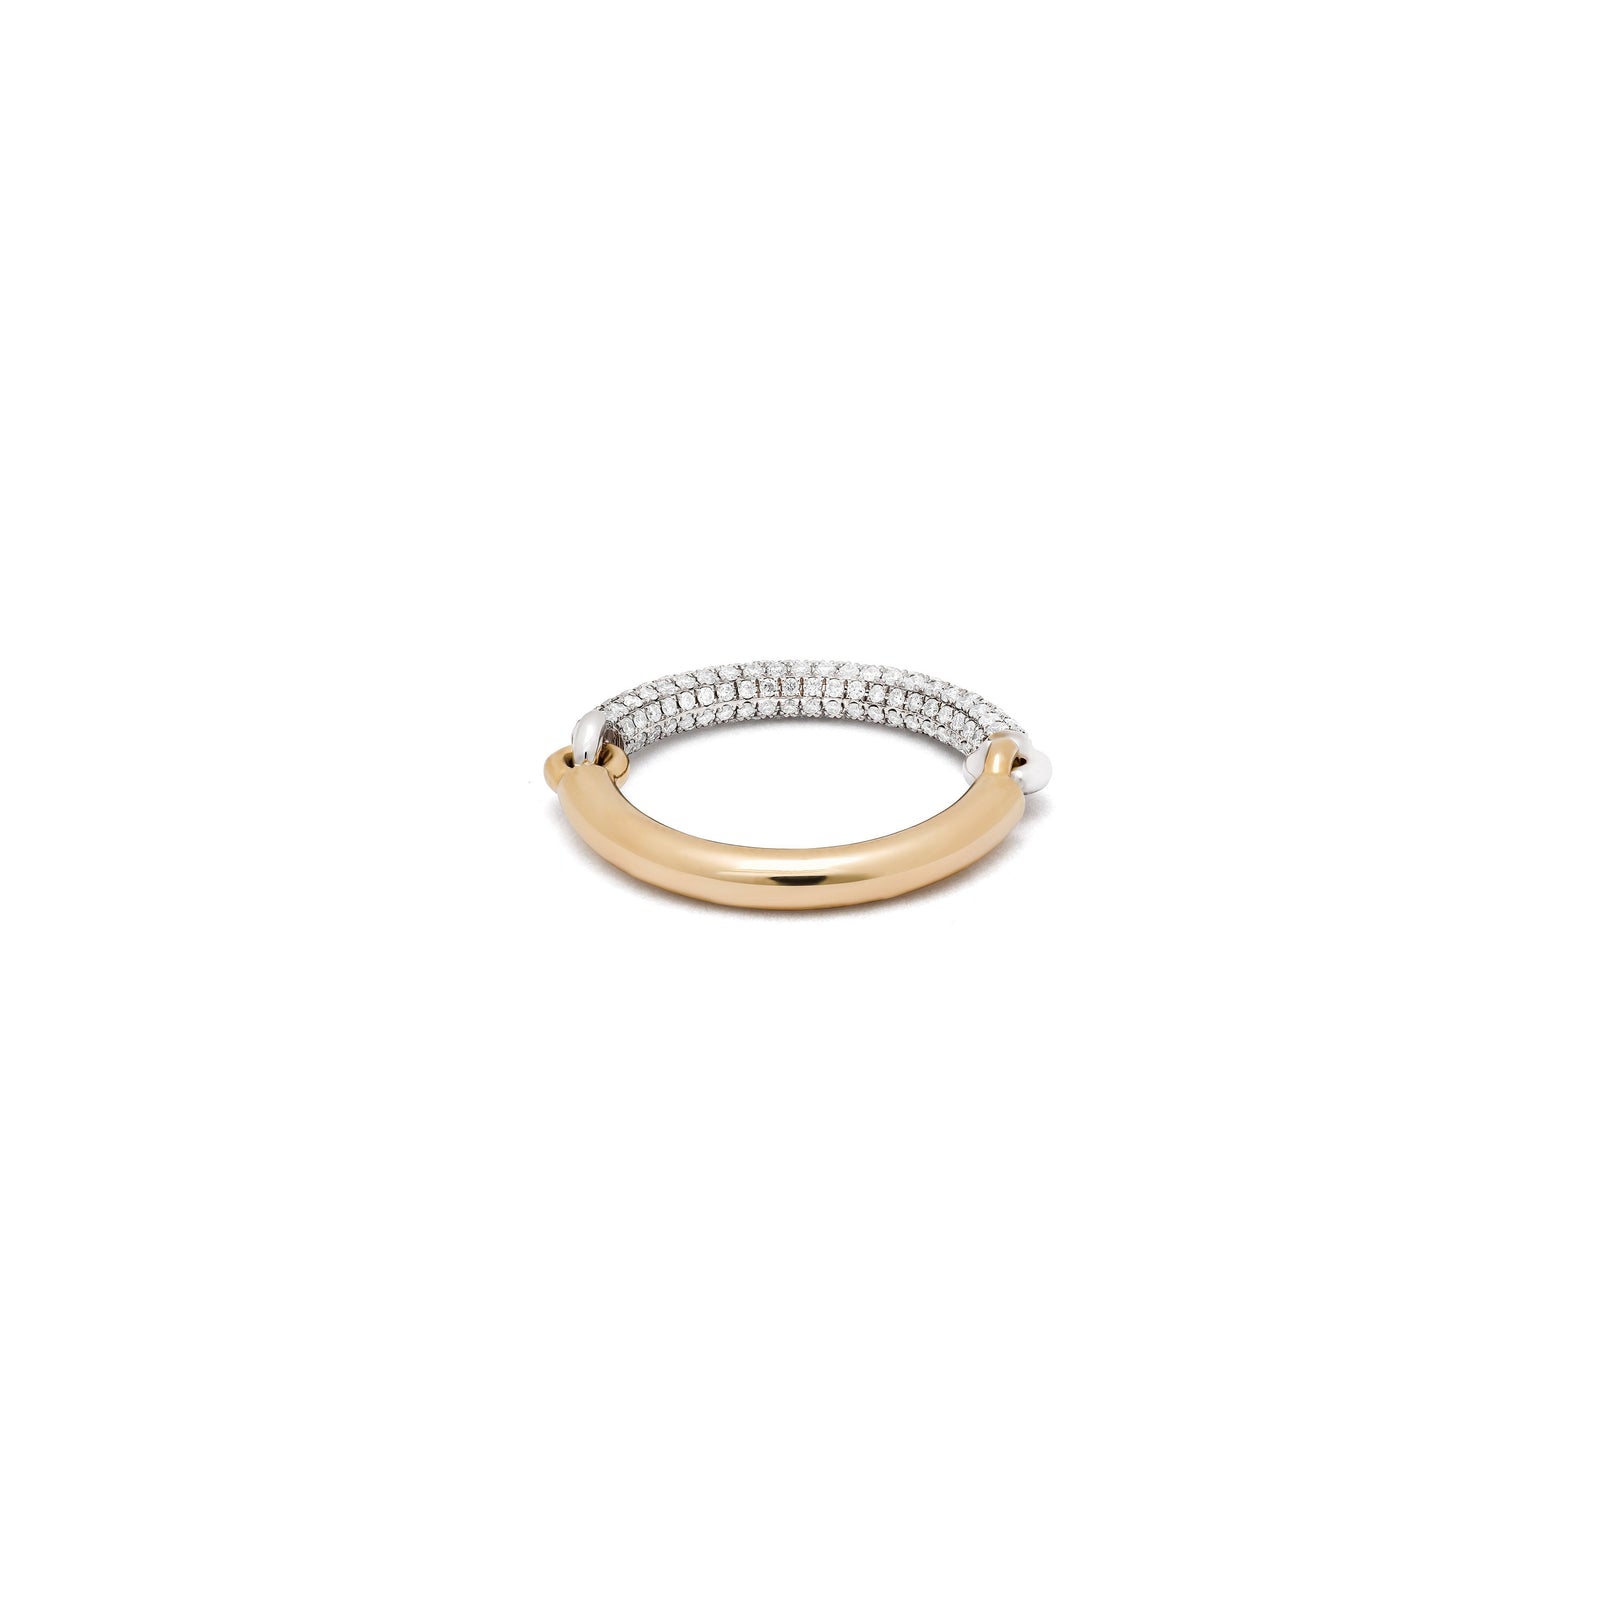 MAOR Aquila hinged band ring with white gold and yellow gold